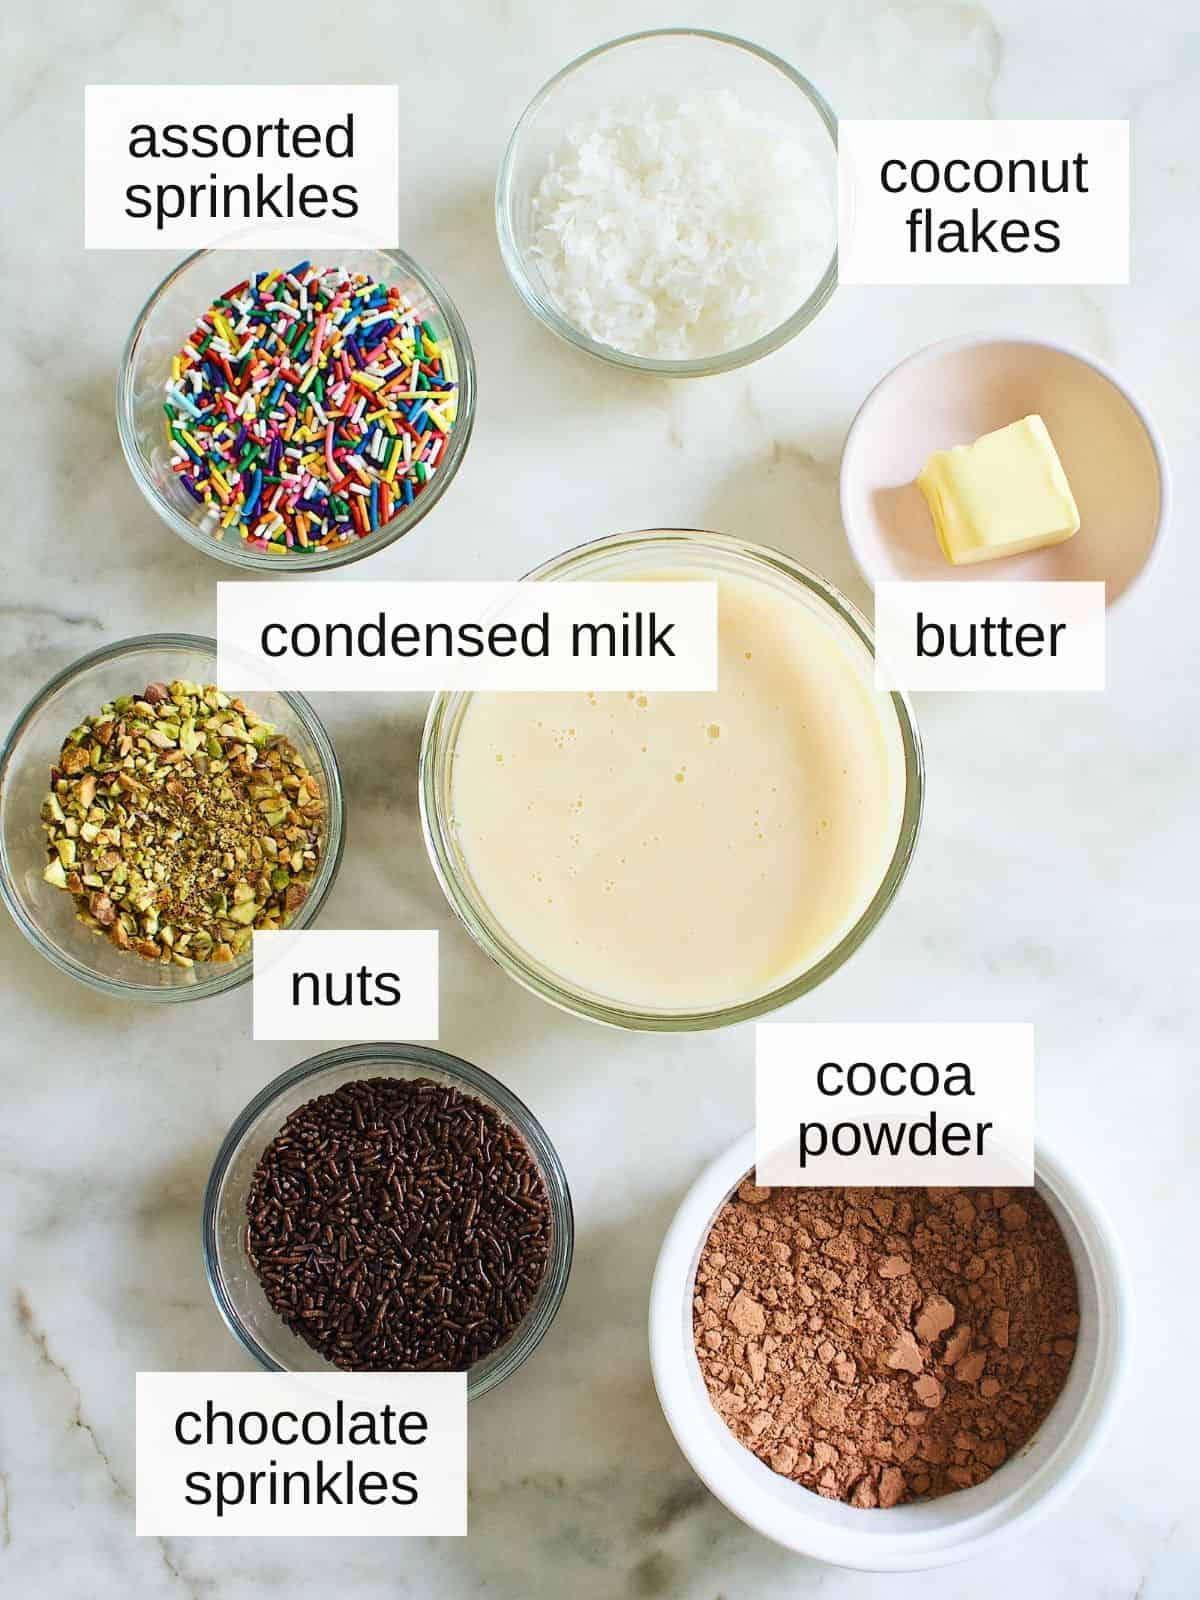 ingredients for brigadeiros, a Brazilian chocolate balls, including assorted sprinkled, coconut flakes, condensed milk, butter, nuts, cocoa powder, and chocolate sprinkles.